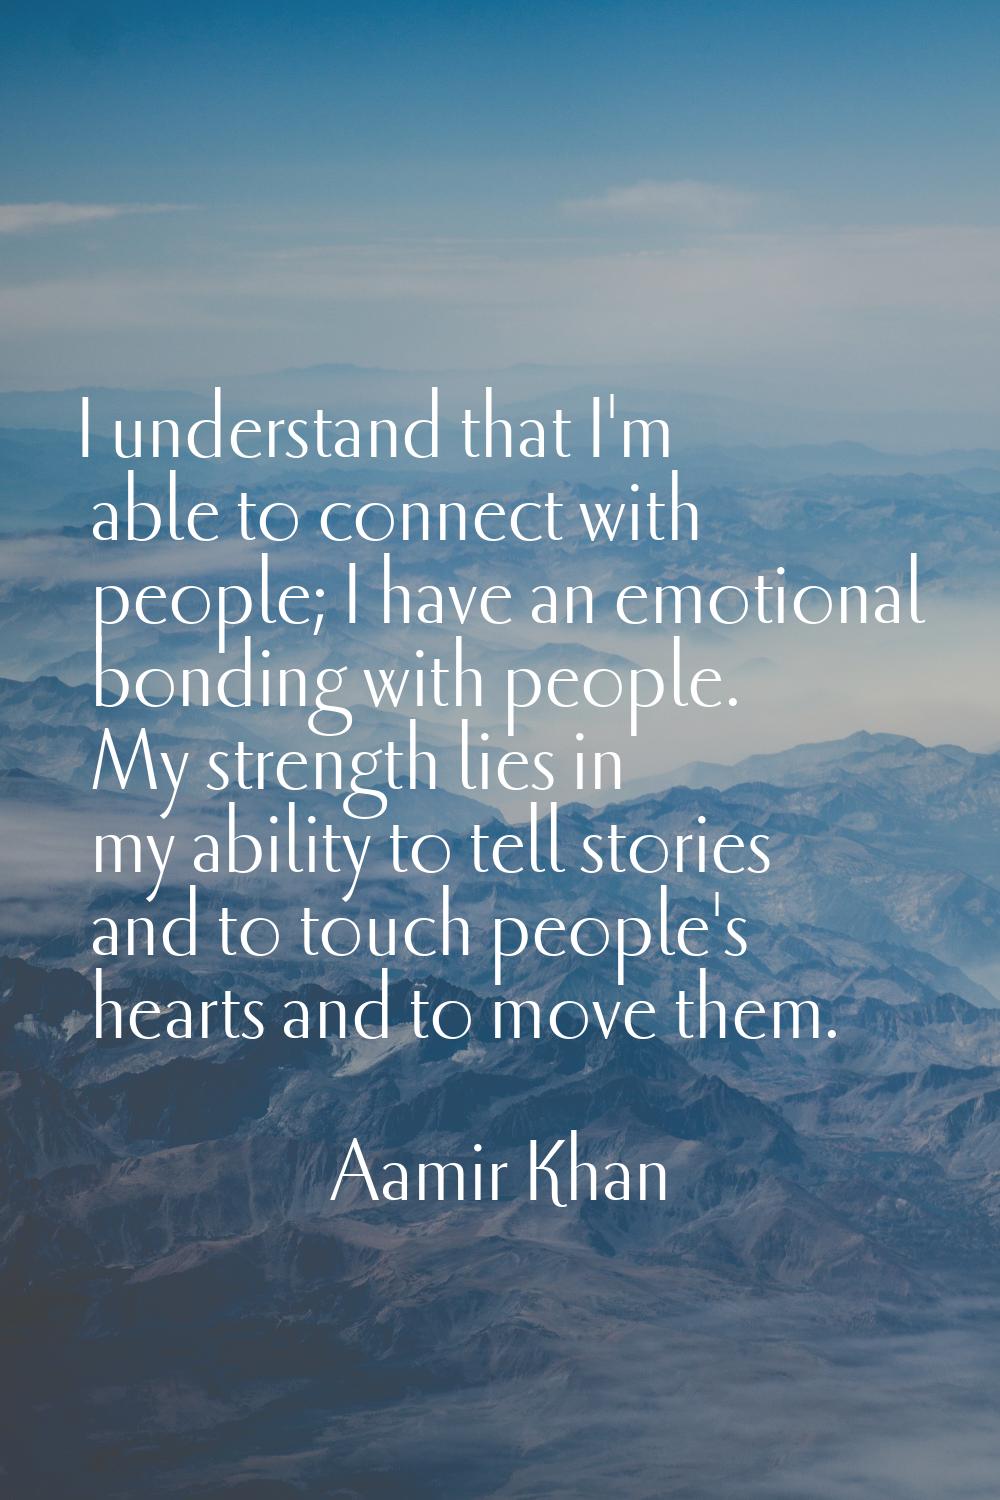 I understand that I'm able to connect with people; I have an emotional bonding with people. My stre